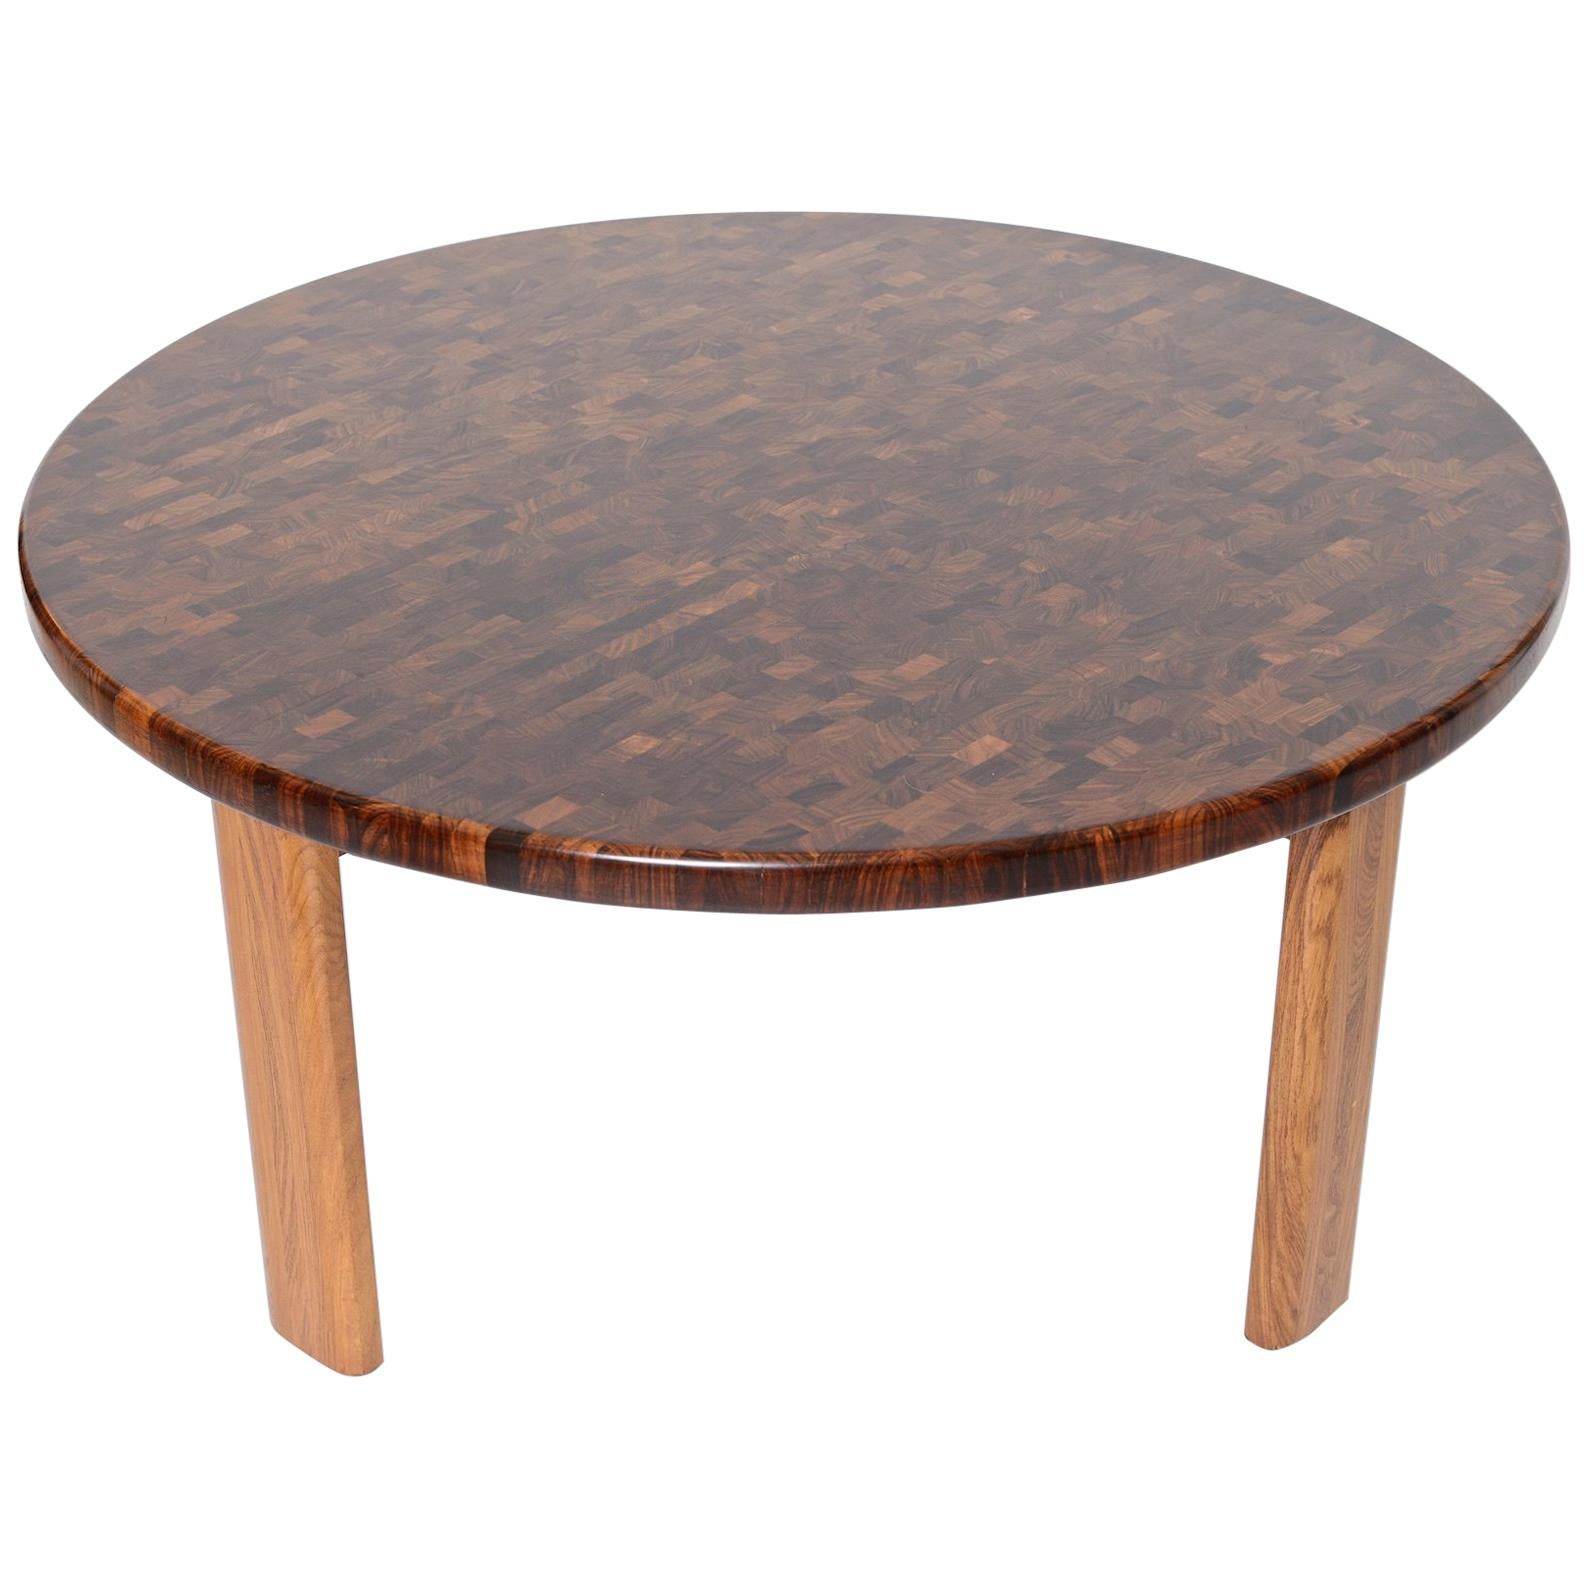 Danish Midcentury Rosewood Parquetry Coffee Table